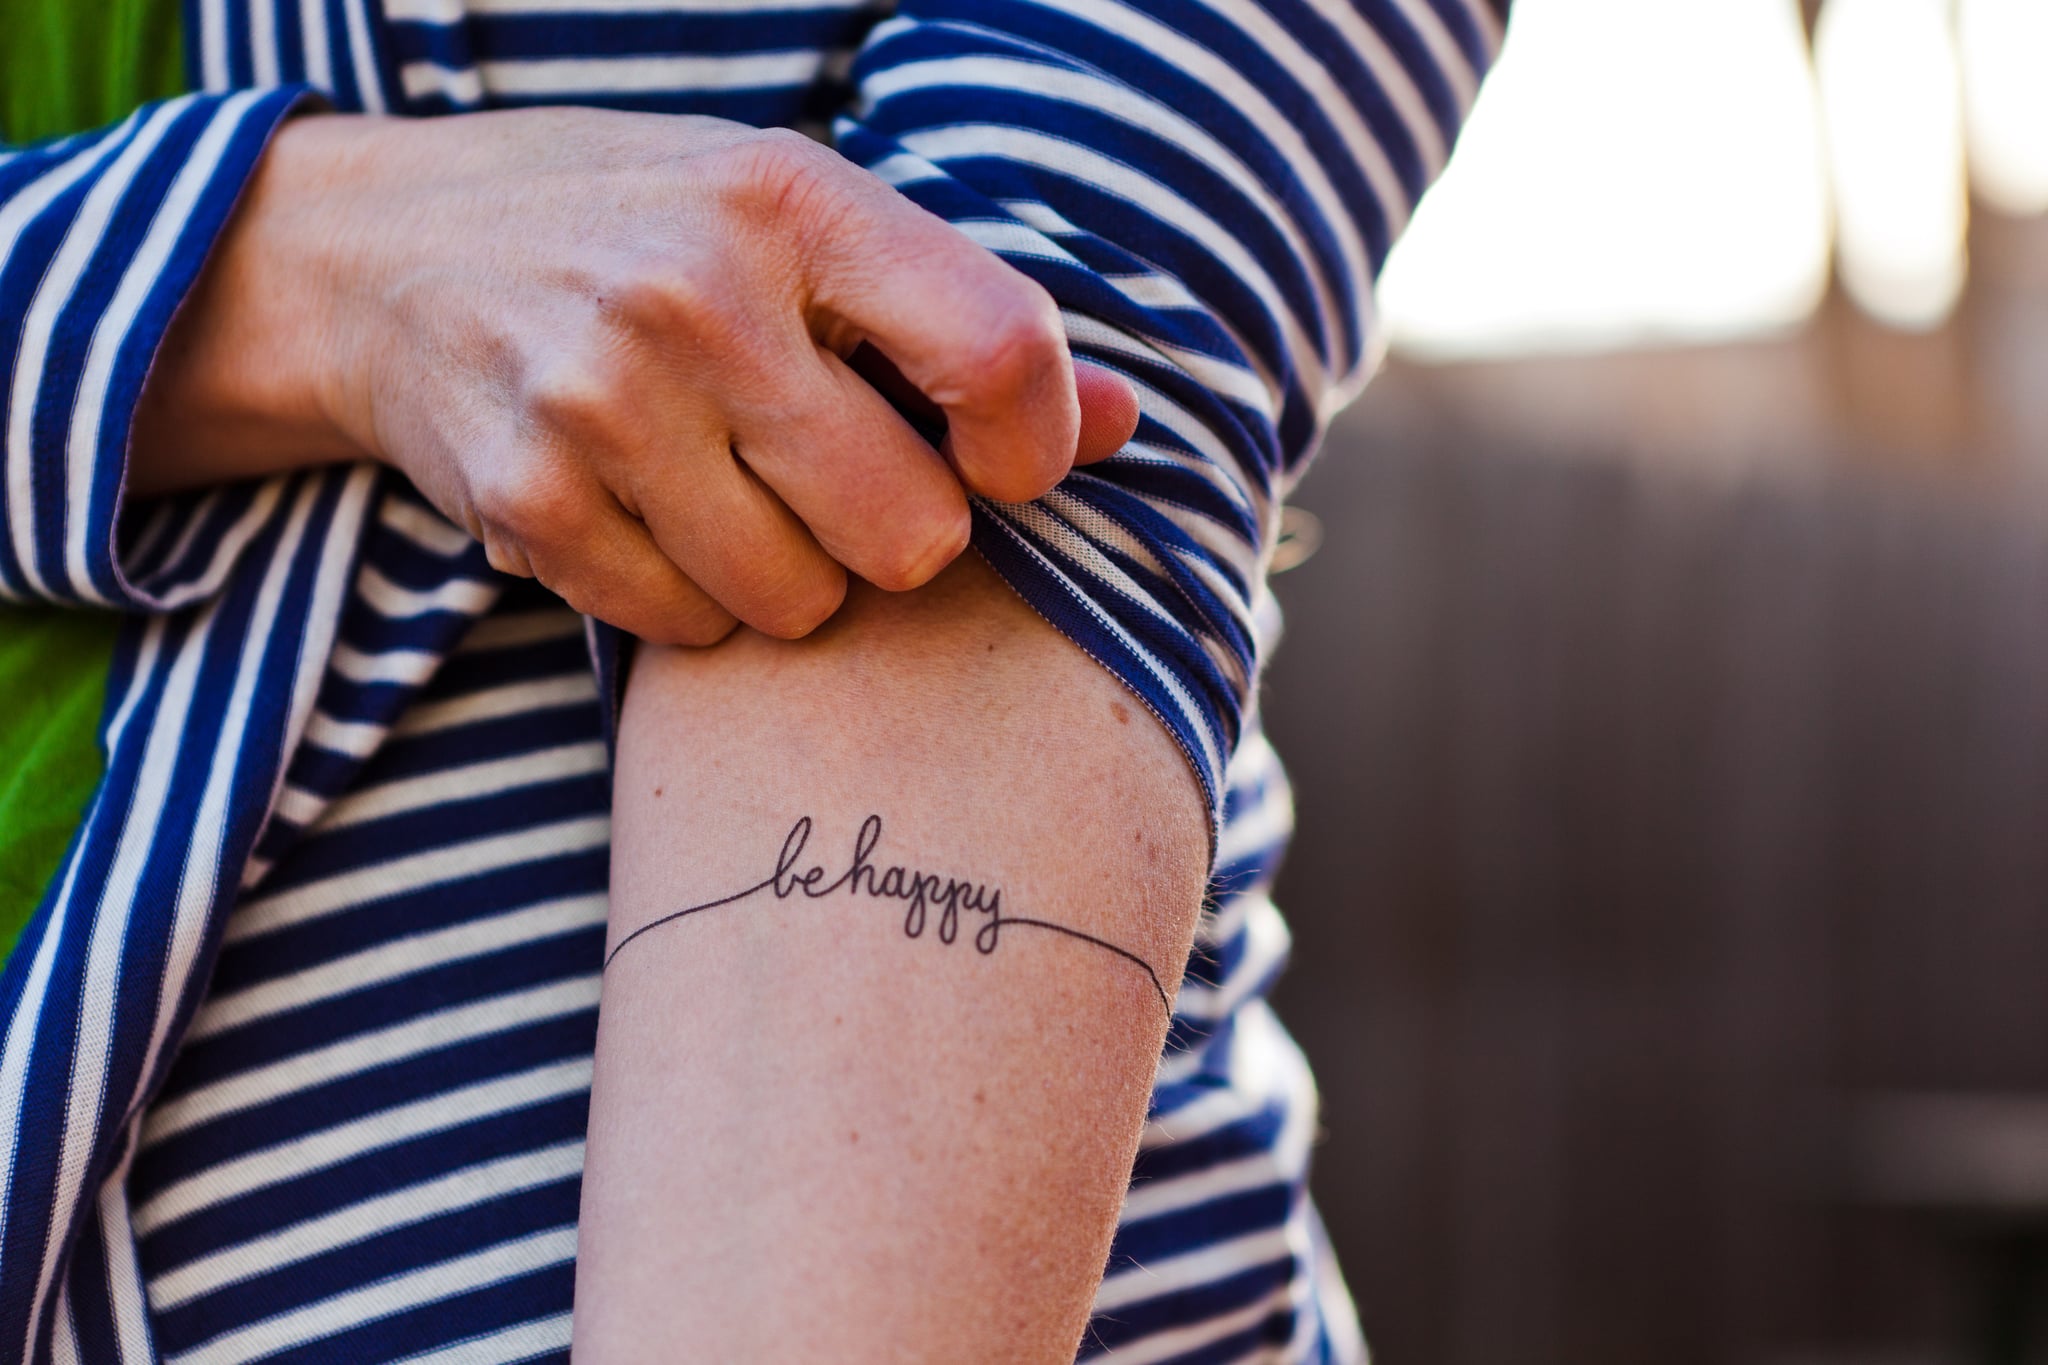 TattooBloq — 40 Tiny and Discreet Tattoos by Witty Button